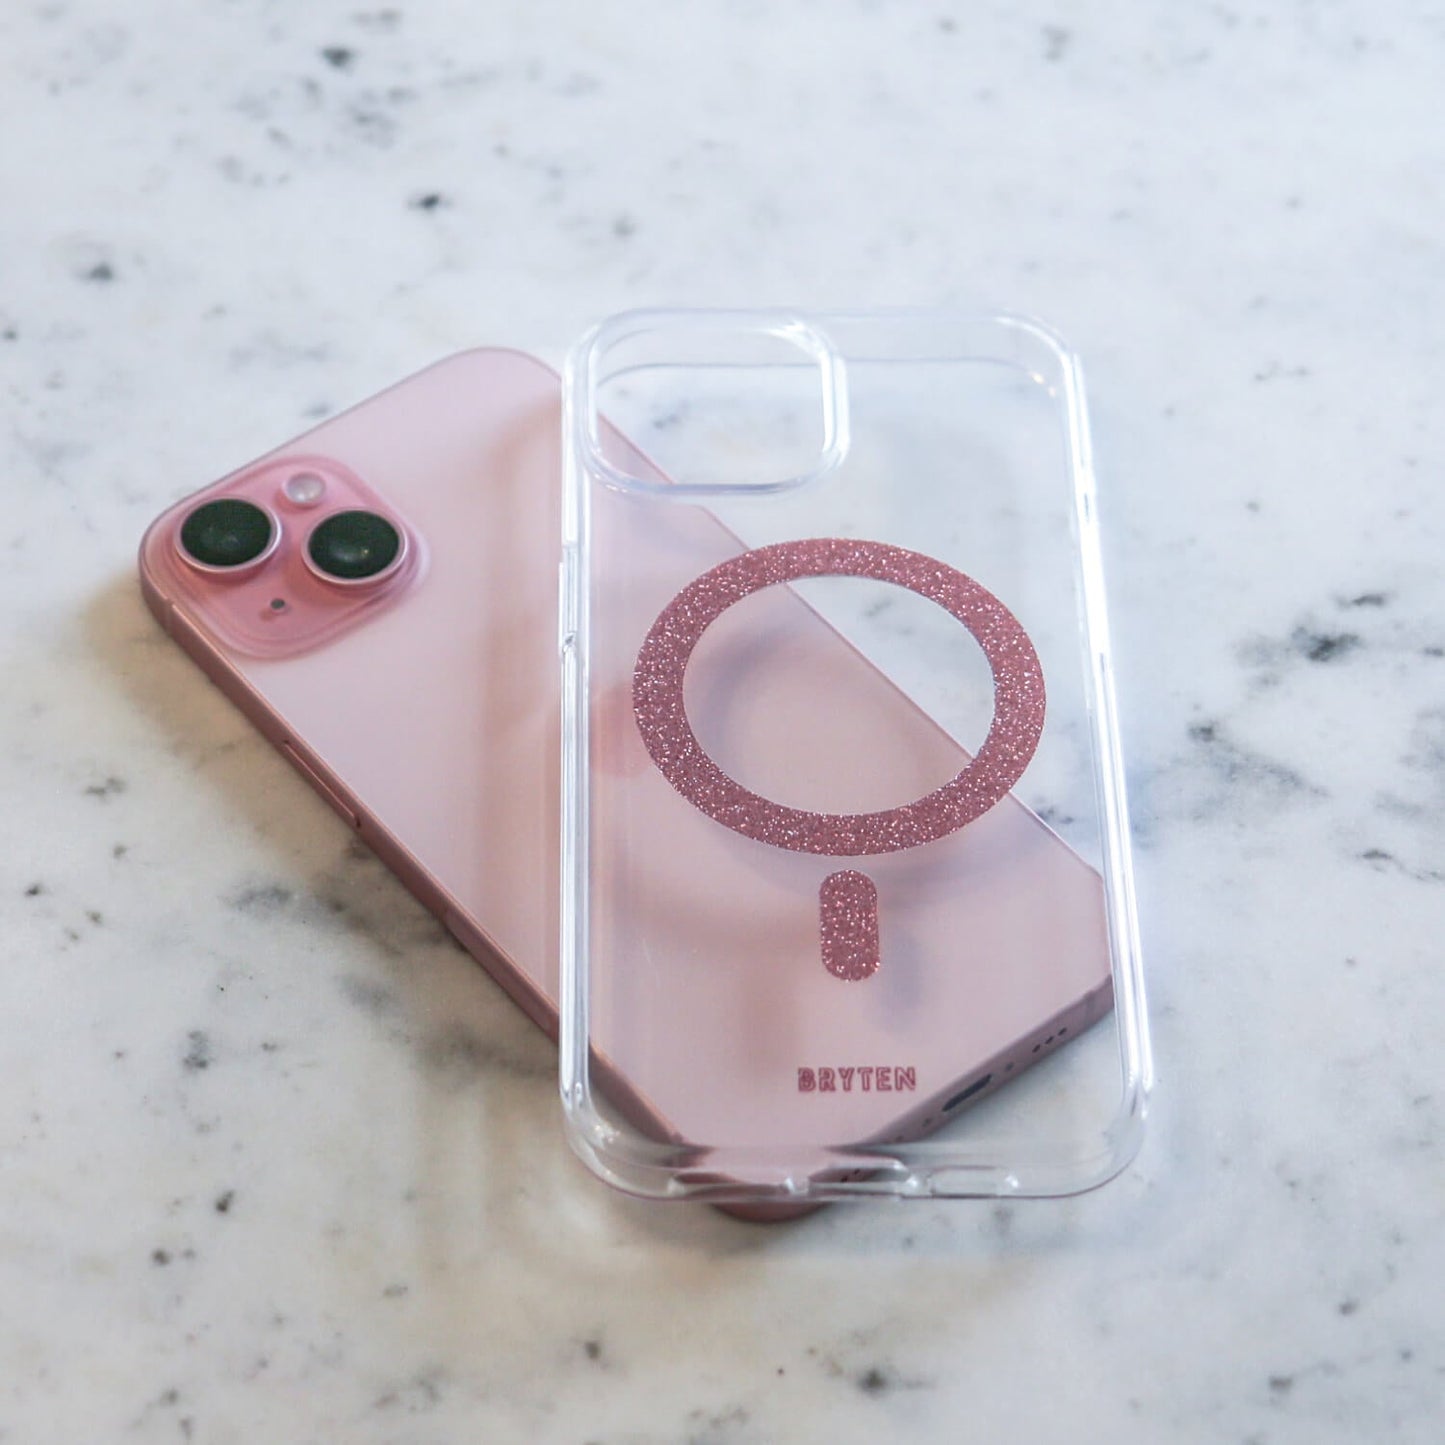 A pink iPhone 15 MagFx MagSafe Case - Bryten by Raptic with a magnifying glass on it, enhanced with MagFx technology.